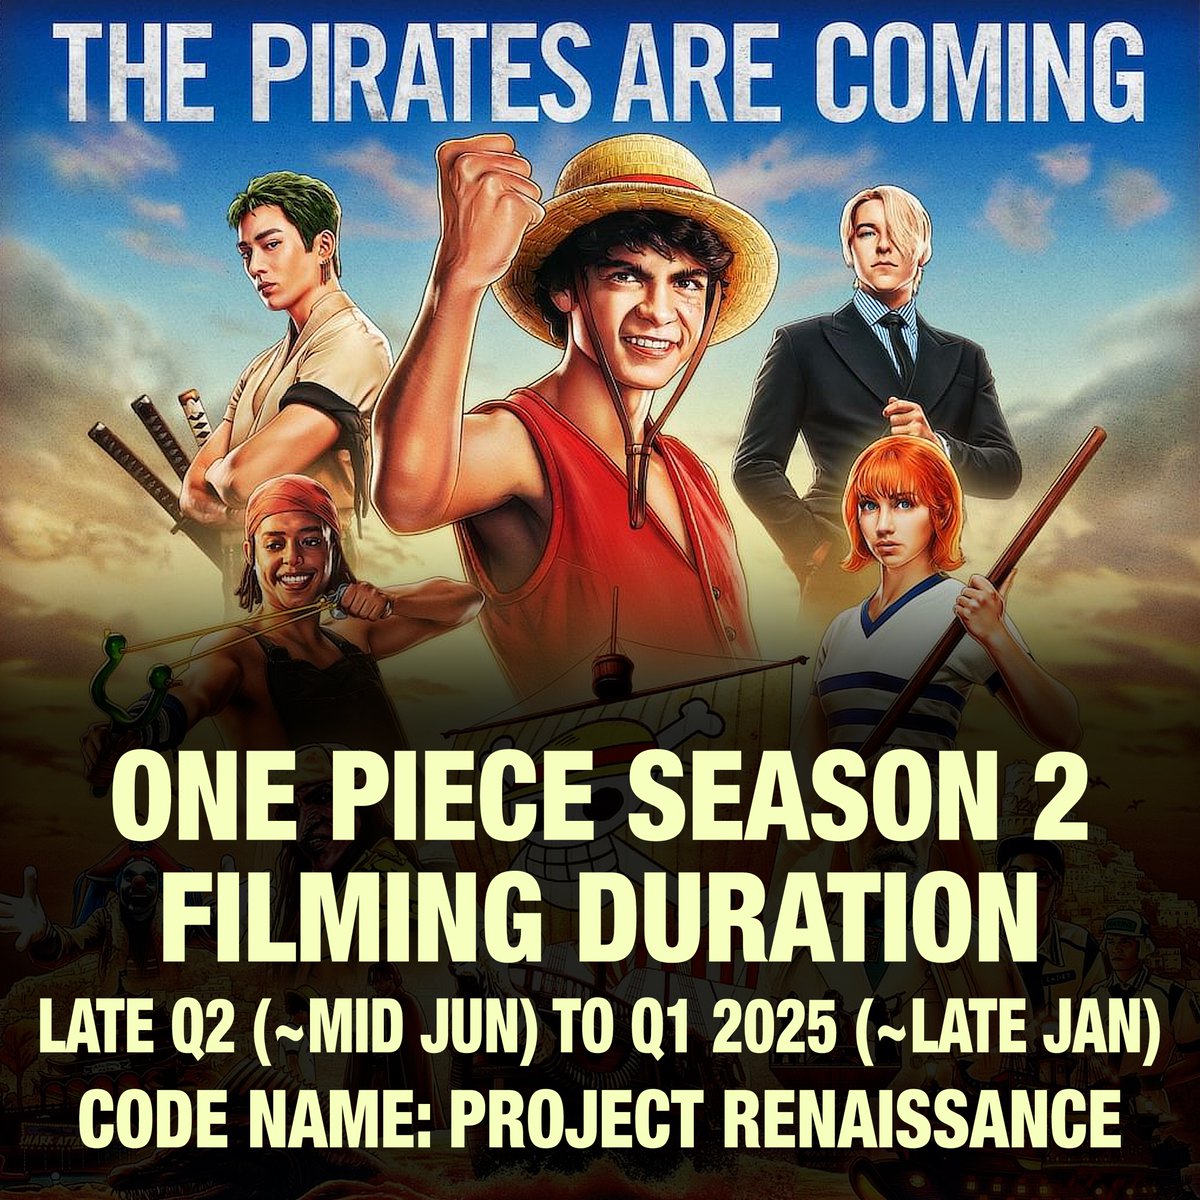 One Piece Netflix Season 2 Update — Filming duration is approximately between Late Q2 2024 (~Mid June) to Q1 2025 (~Late January). Speculated Code Name for Season 2 is 'Project Renaissance'. Link: whats-on-netflix.com/news/one-piece…